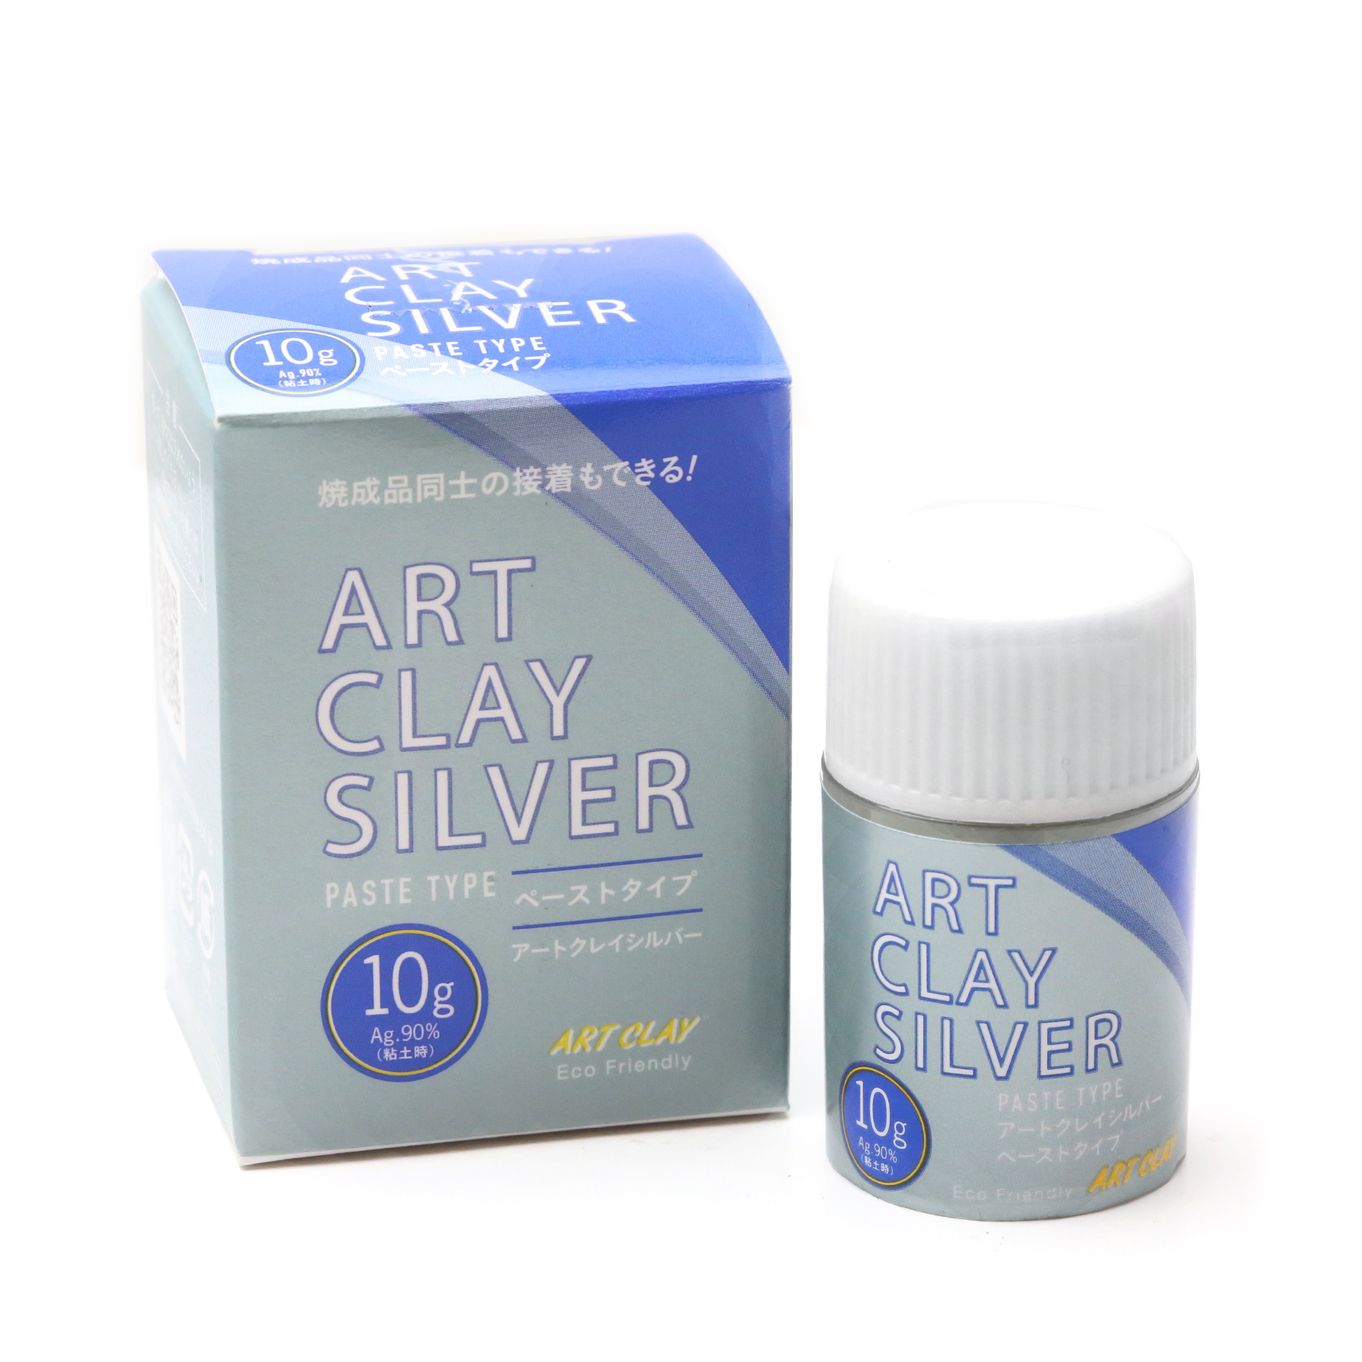 Art Clay Silver Jewelry Making 10g A-0093 ST Slow Tarnish Syringe Type Precious  Metal Clay PMC, for Adding Patterns & Textures